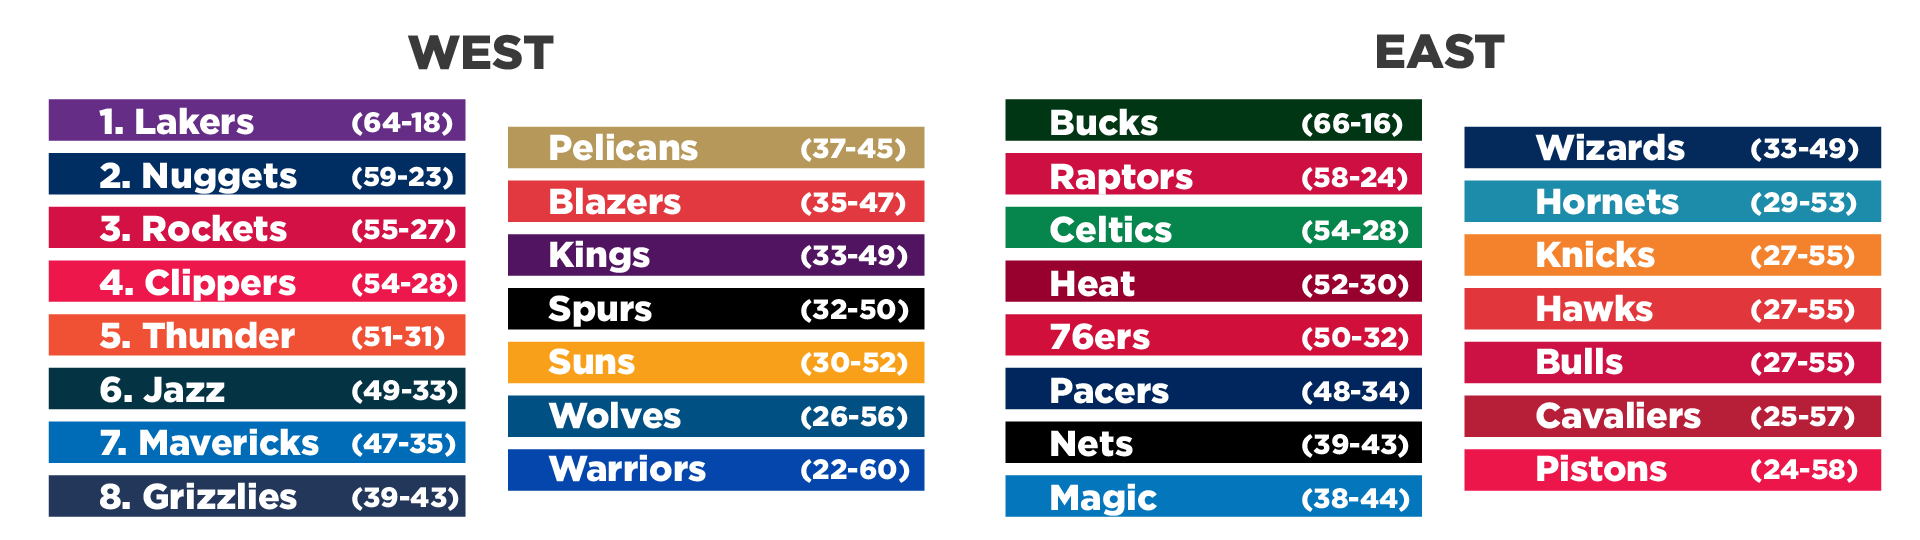 The projected final standings based on the Stats Perform model